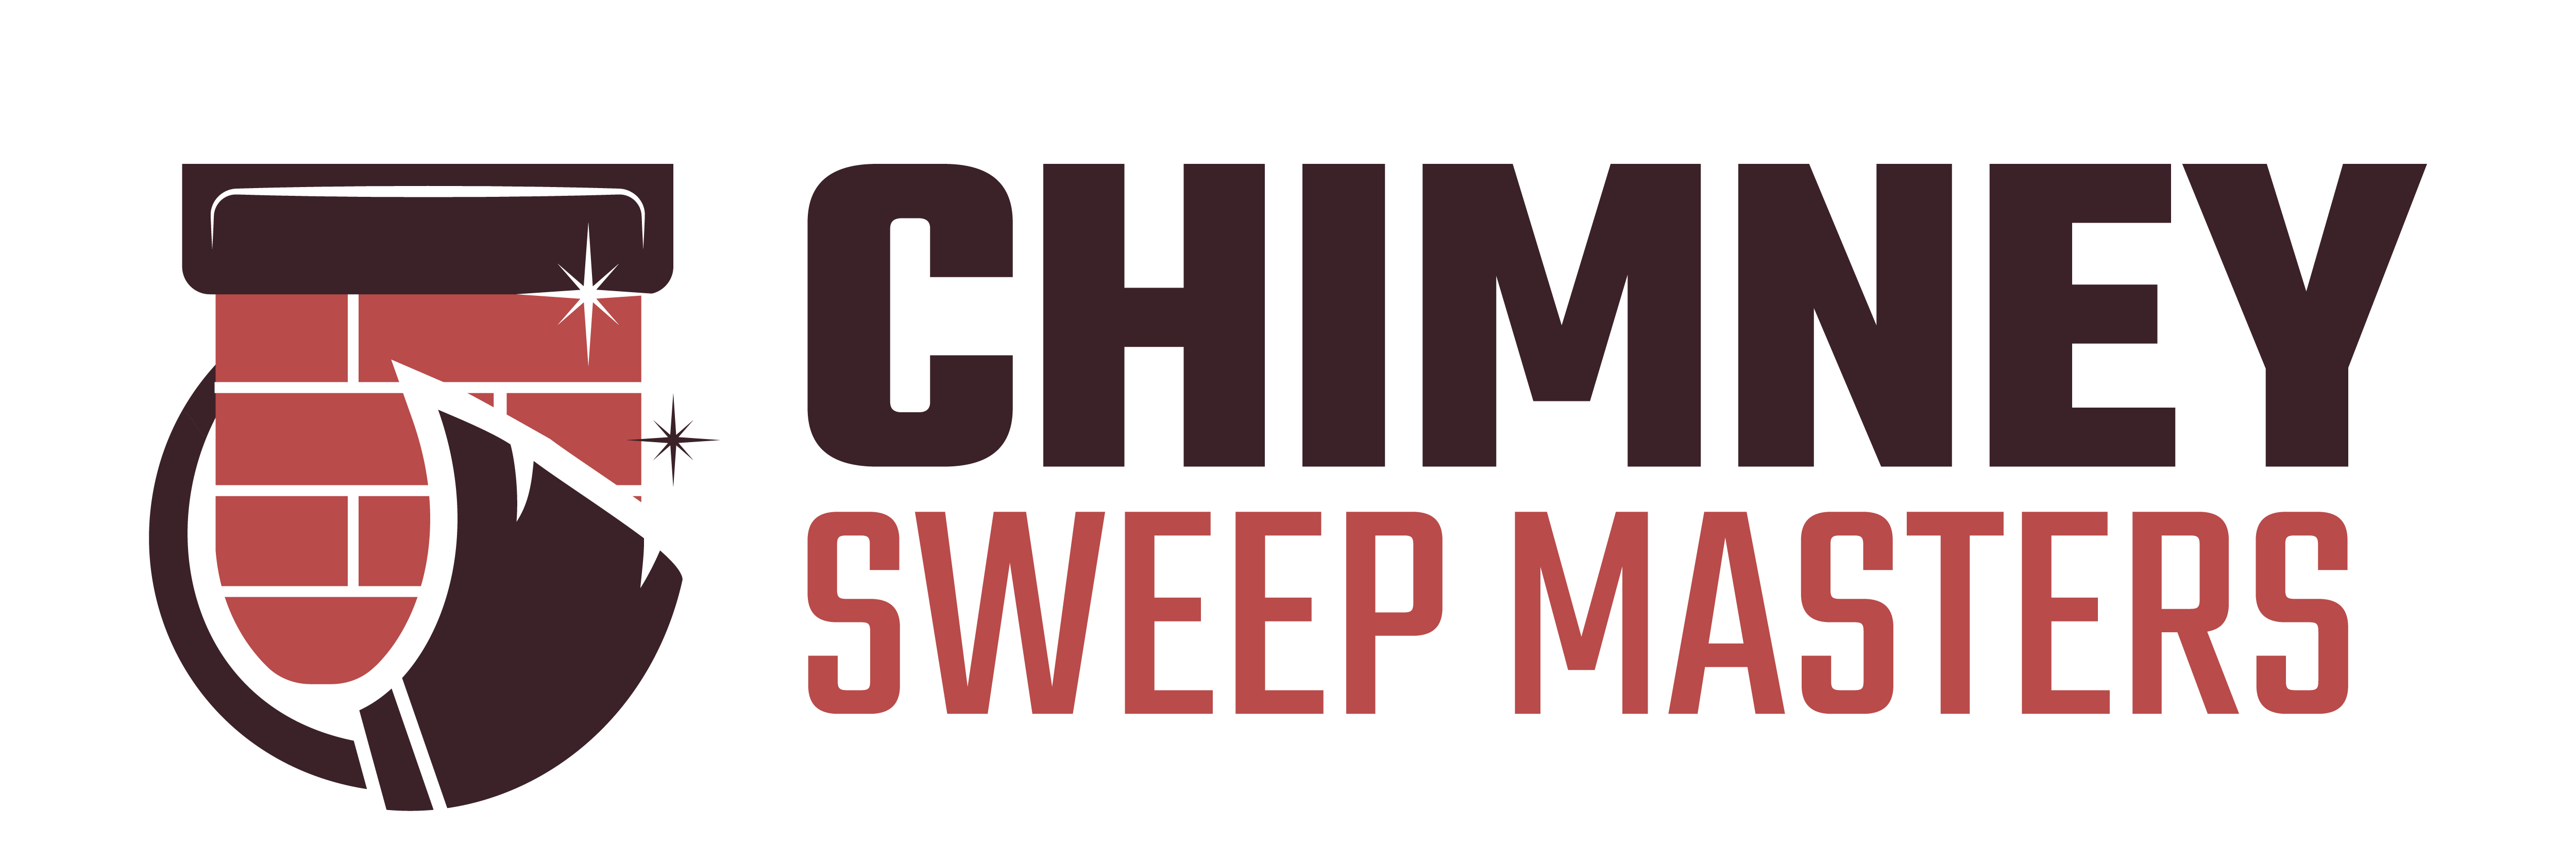 Chimney Sweep Masters Cherry Valley Logo